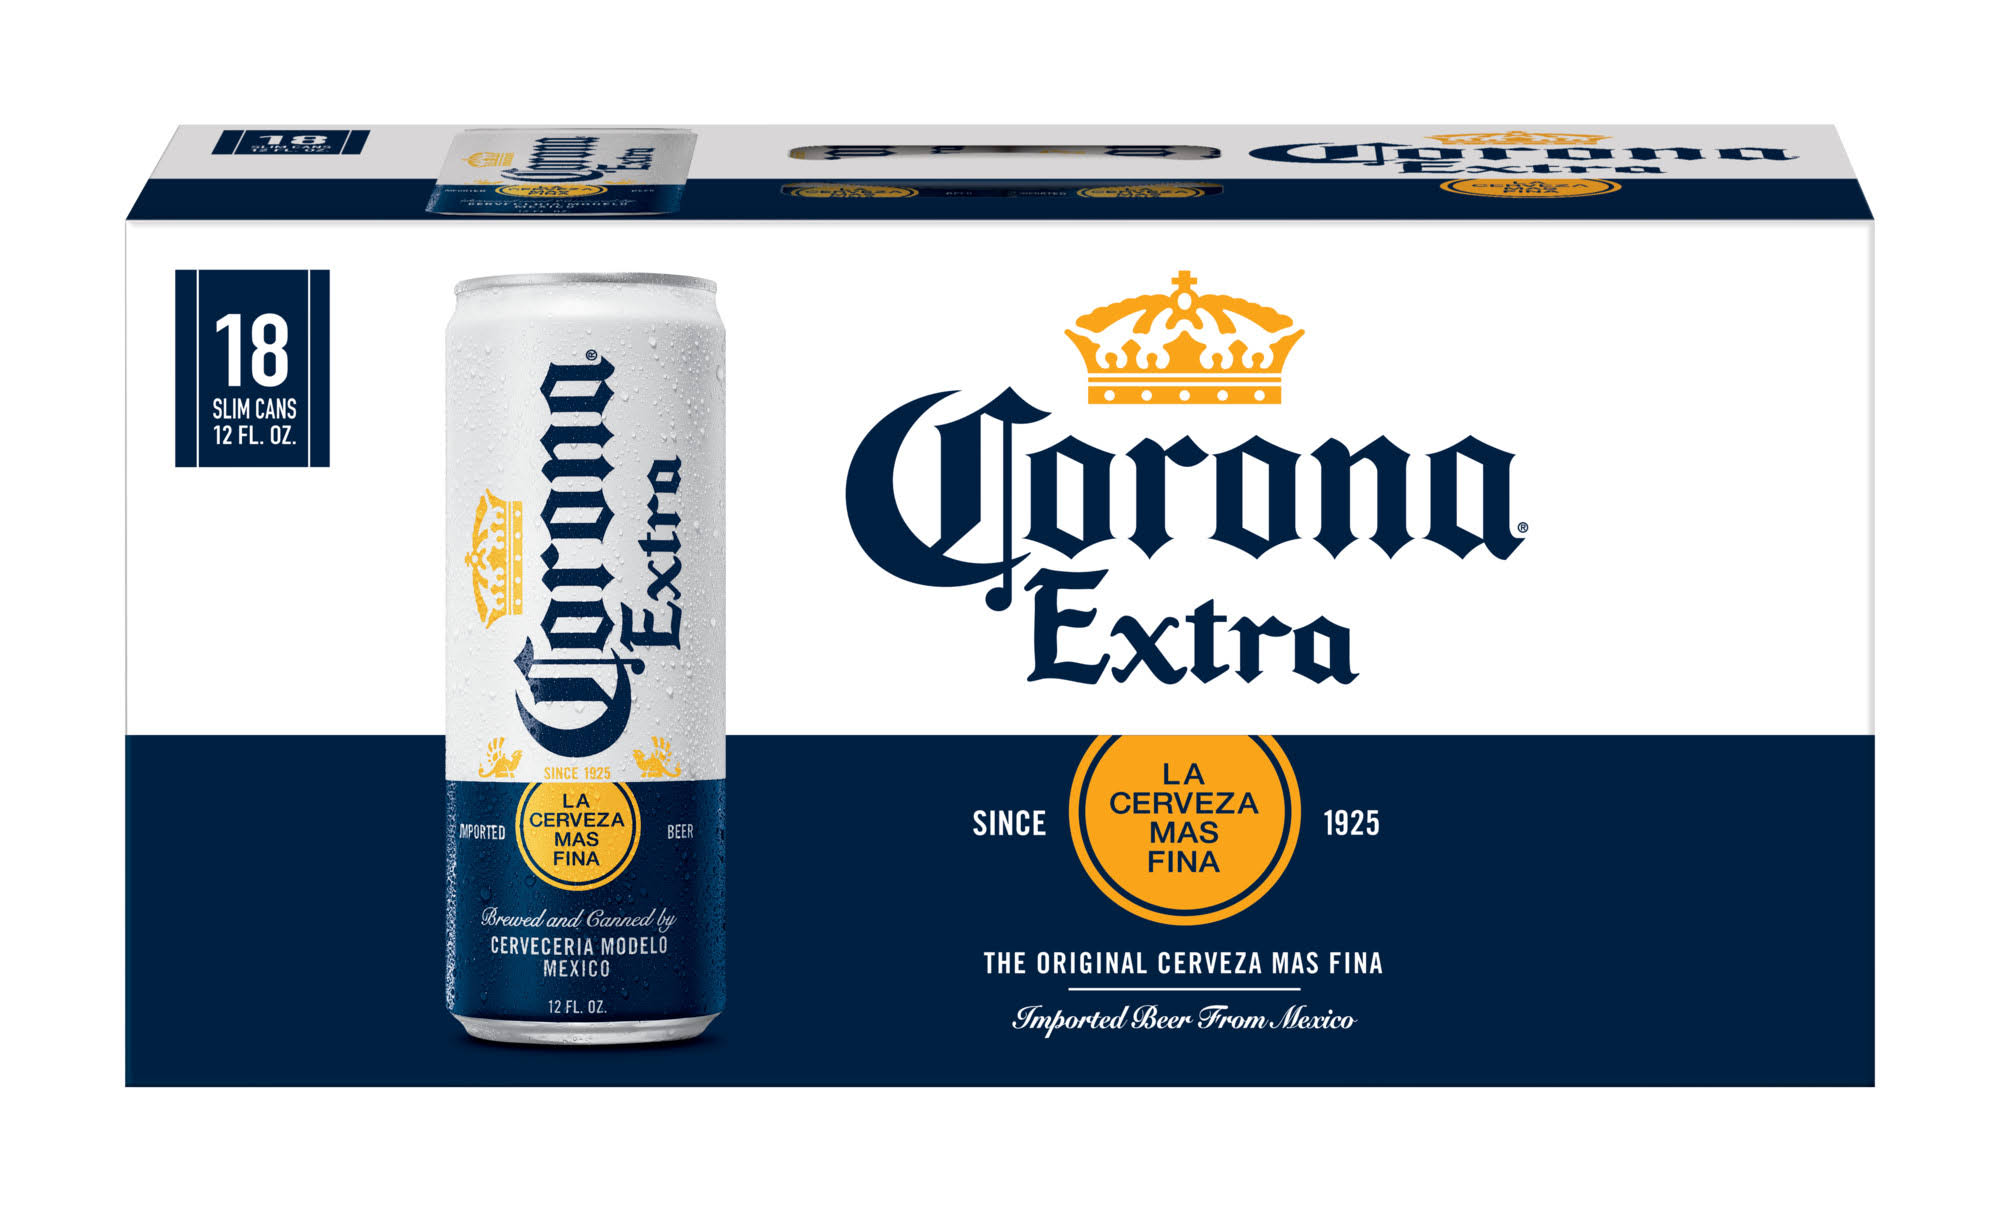 Corona Extra Beer - 18 pack, 12 fl oz cans